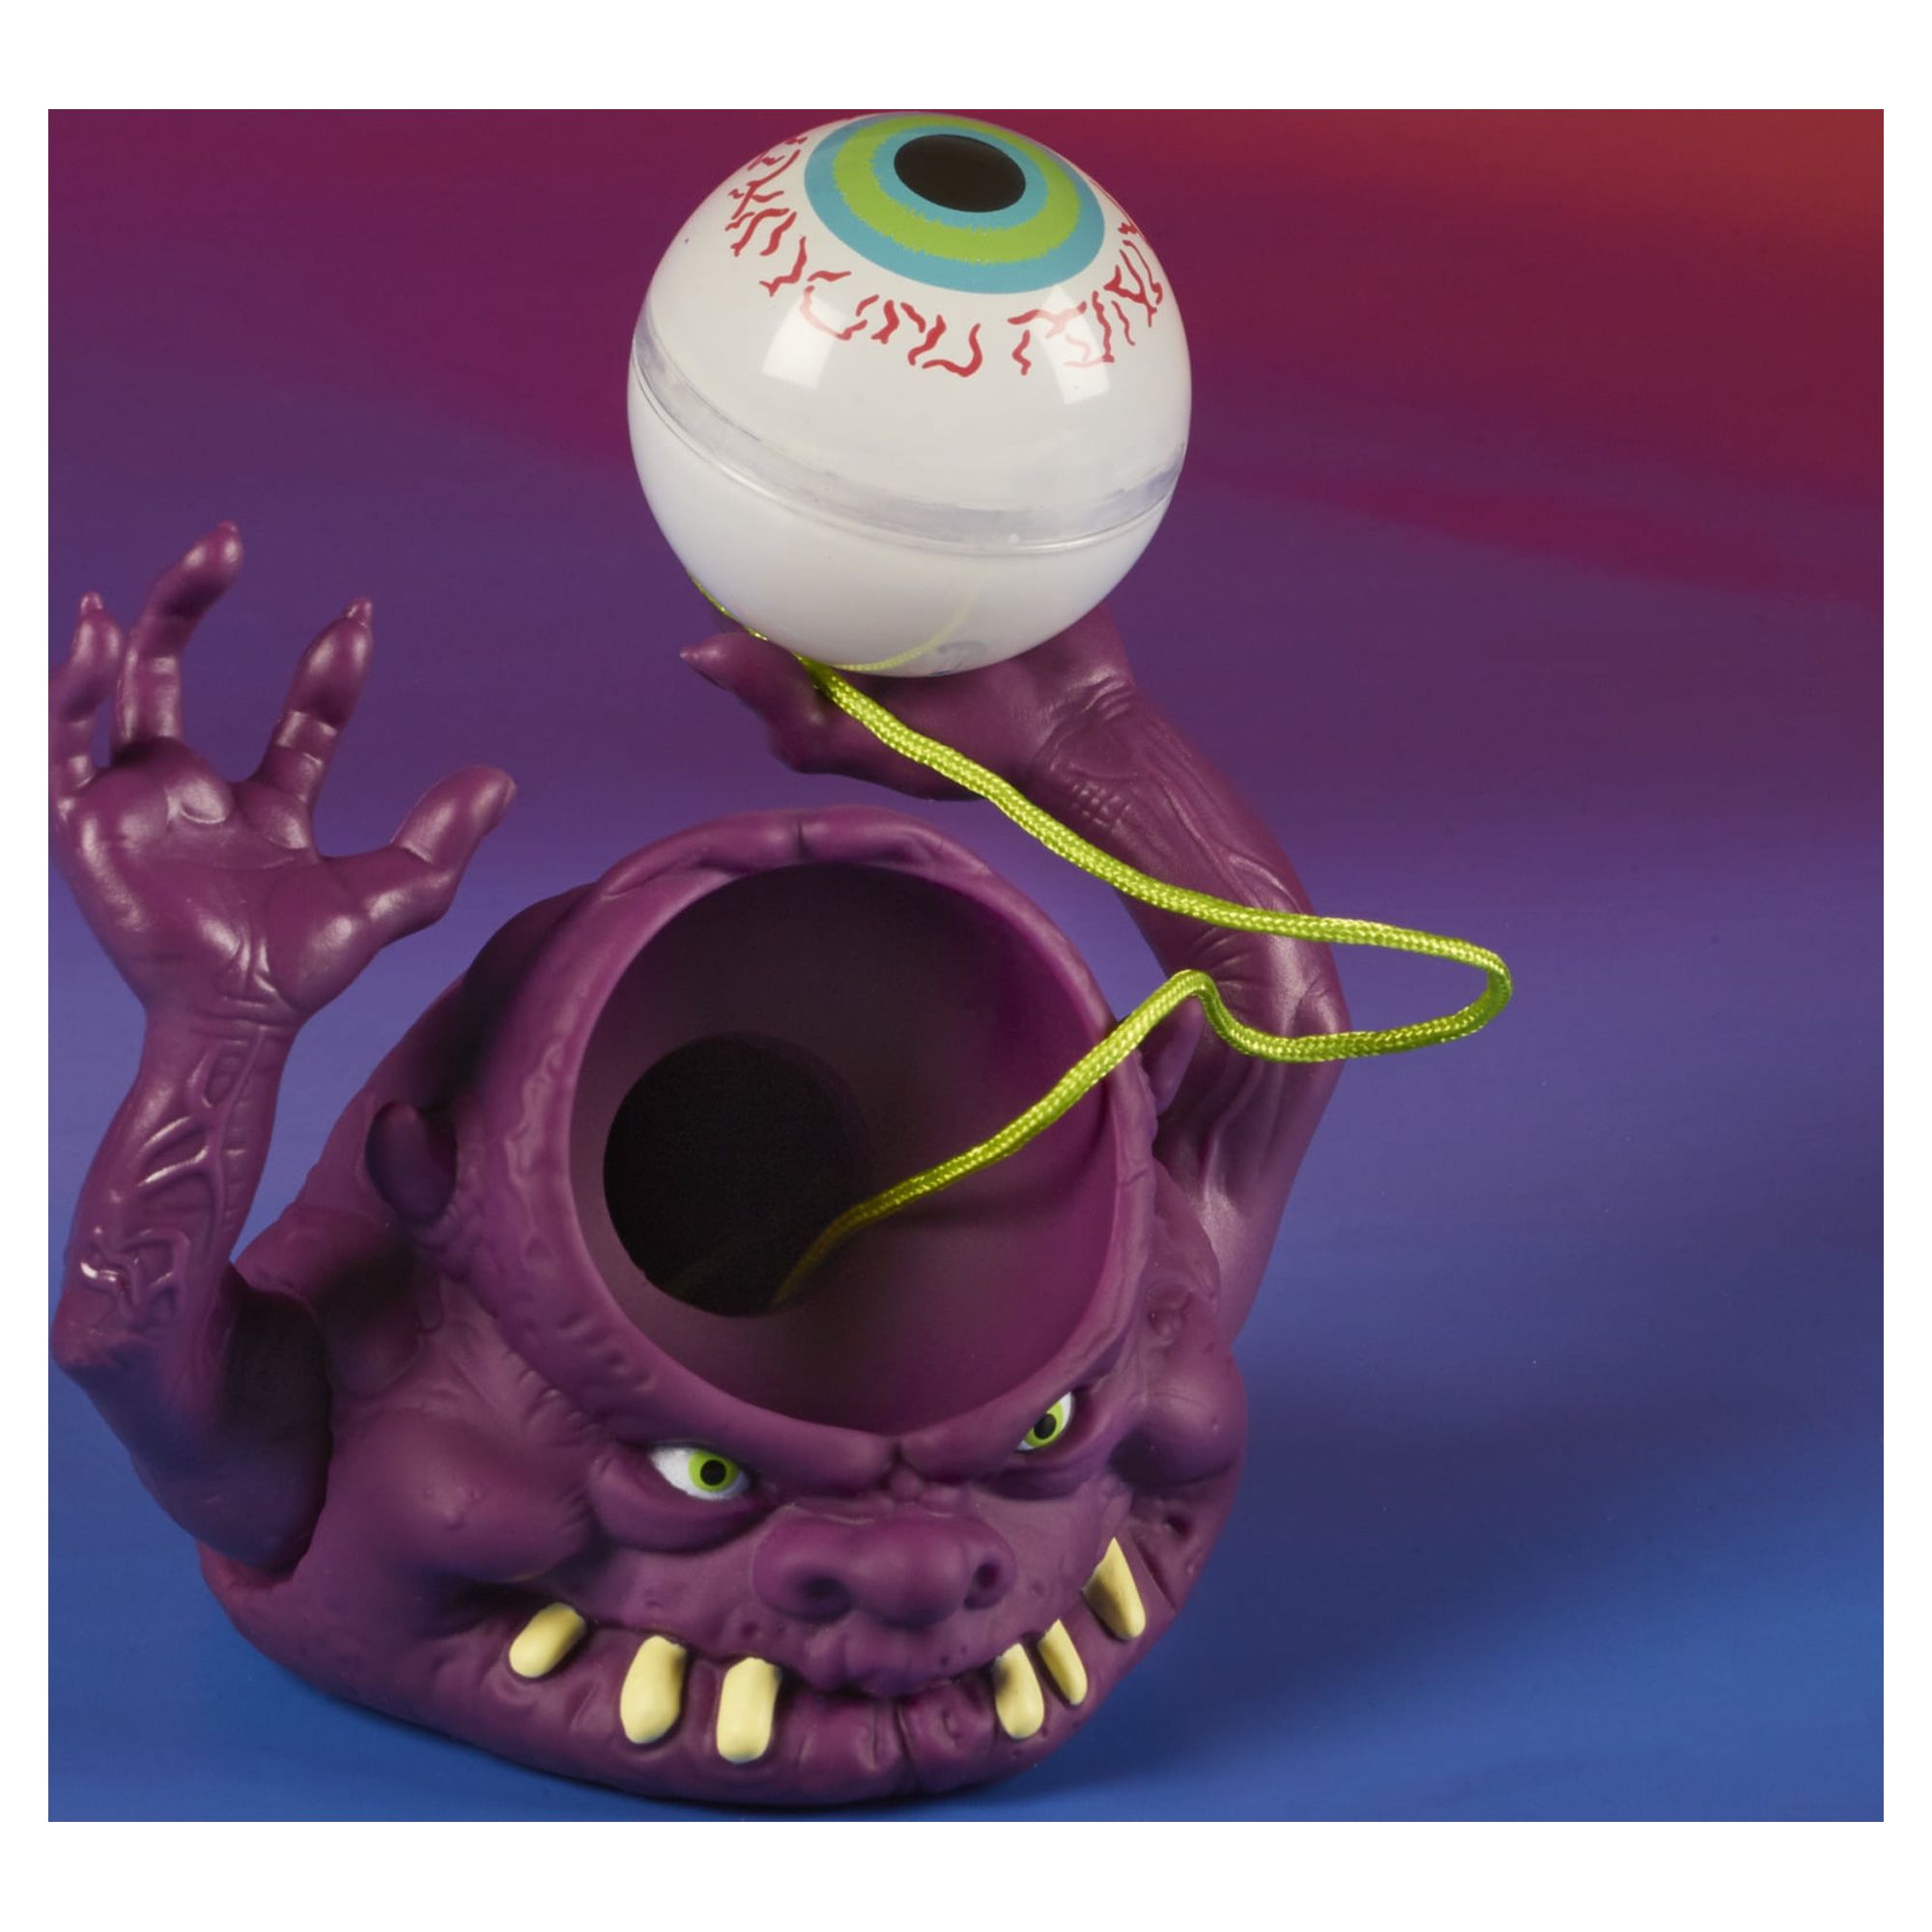 Ghostbusters Kenner Classics The Real Ghostbusters Bug-Eye Ghost Retro Kids Toy Action Figure for Boys and Girls Ages 4 5 6 7 8 and Up - image 2 of 6